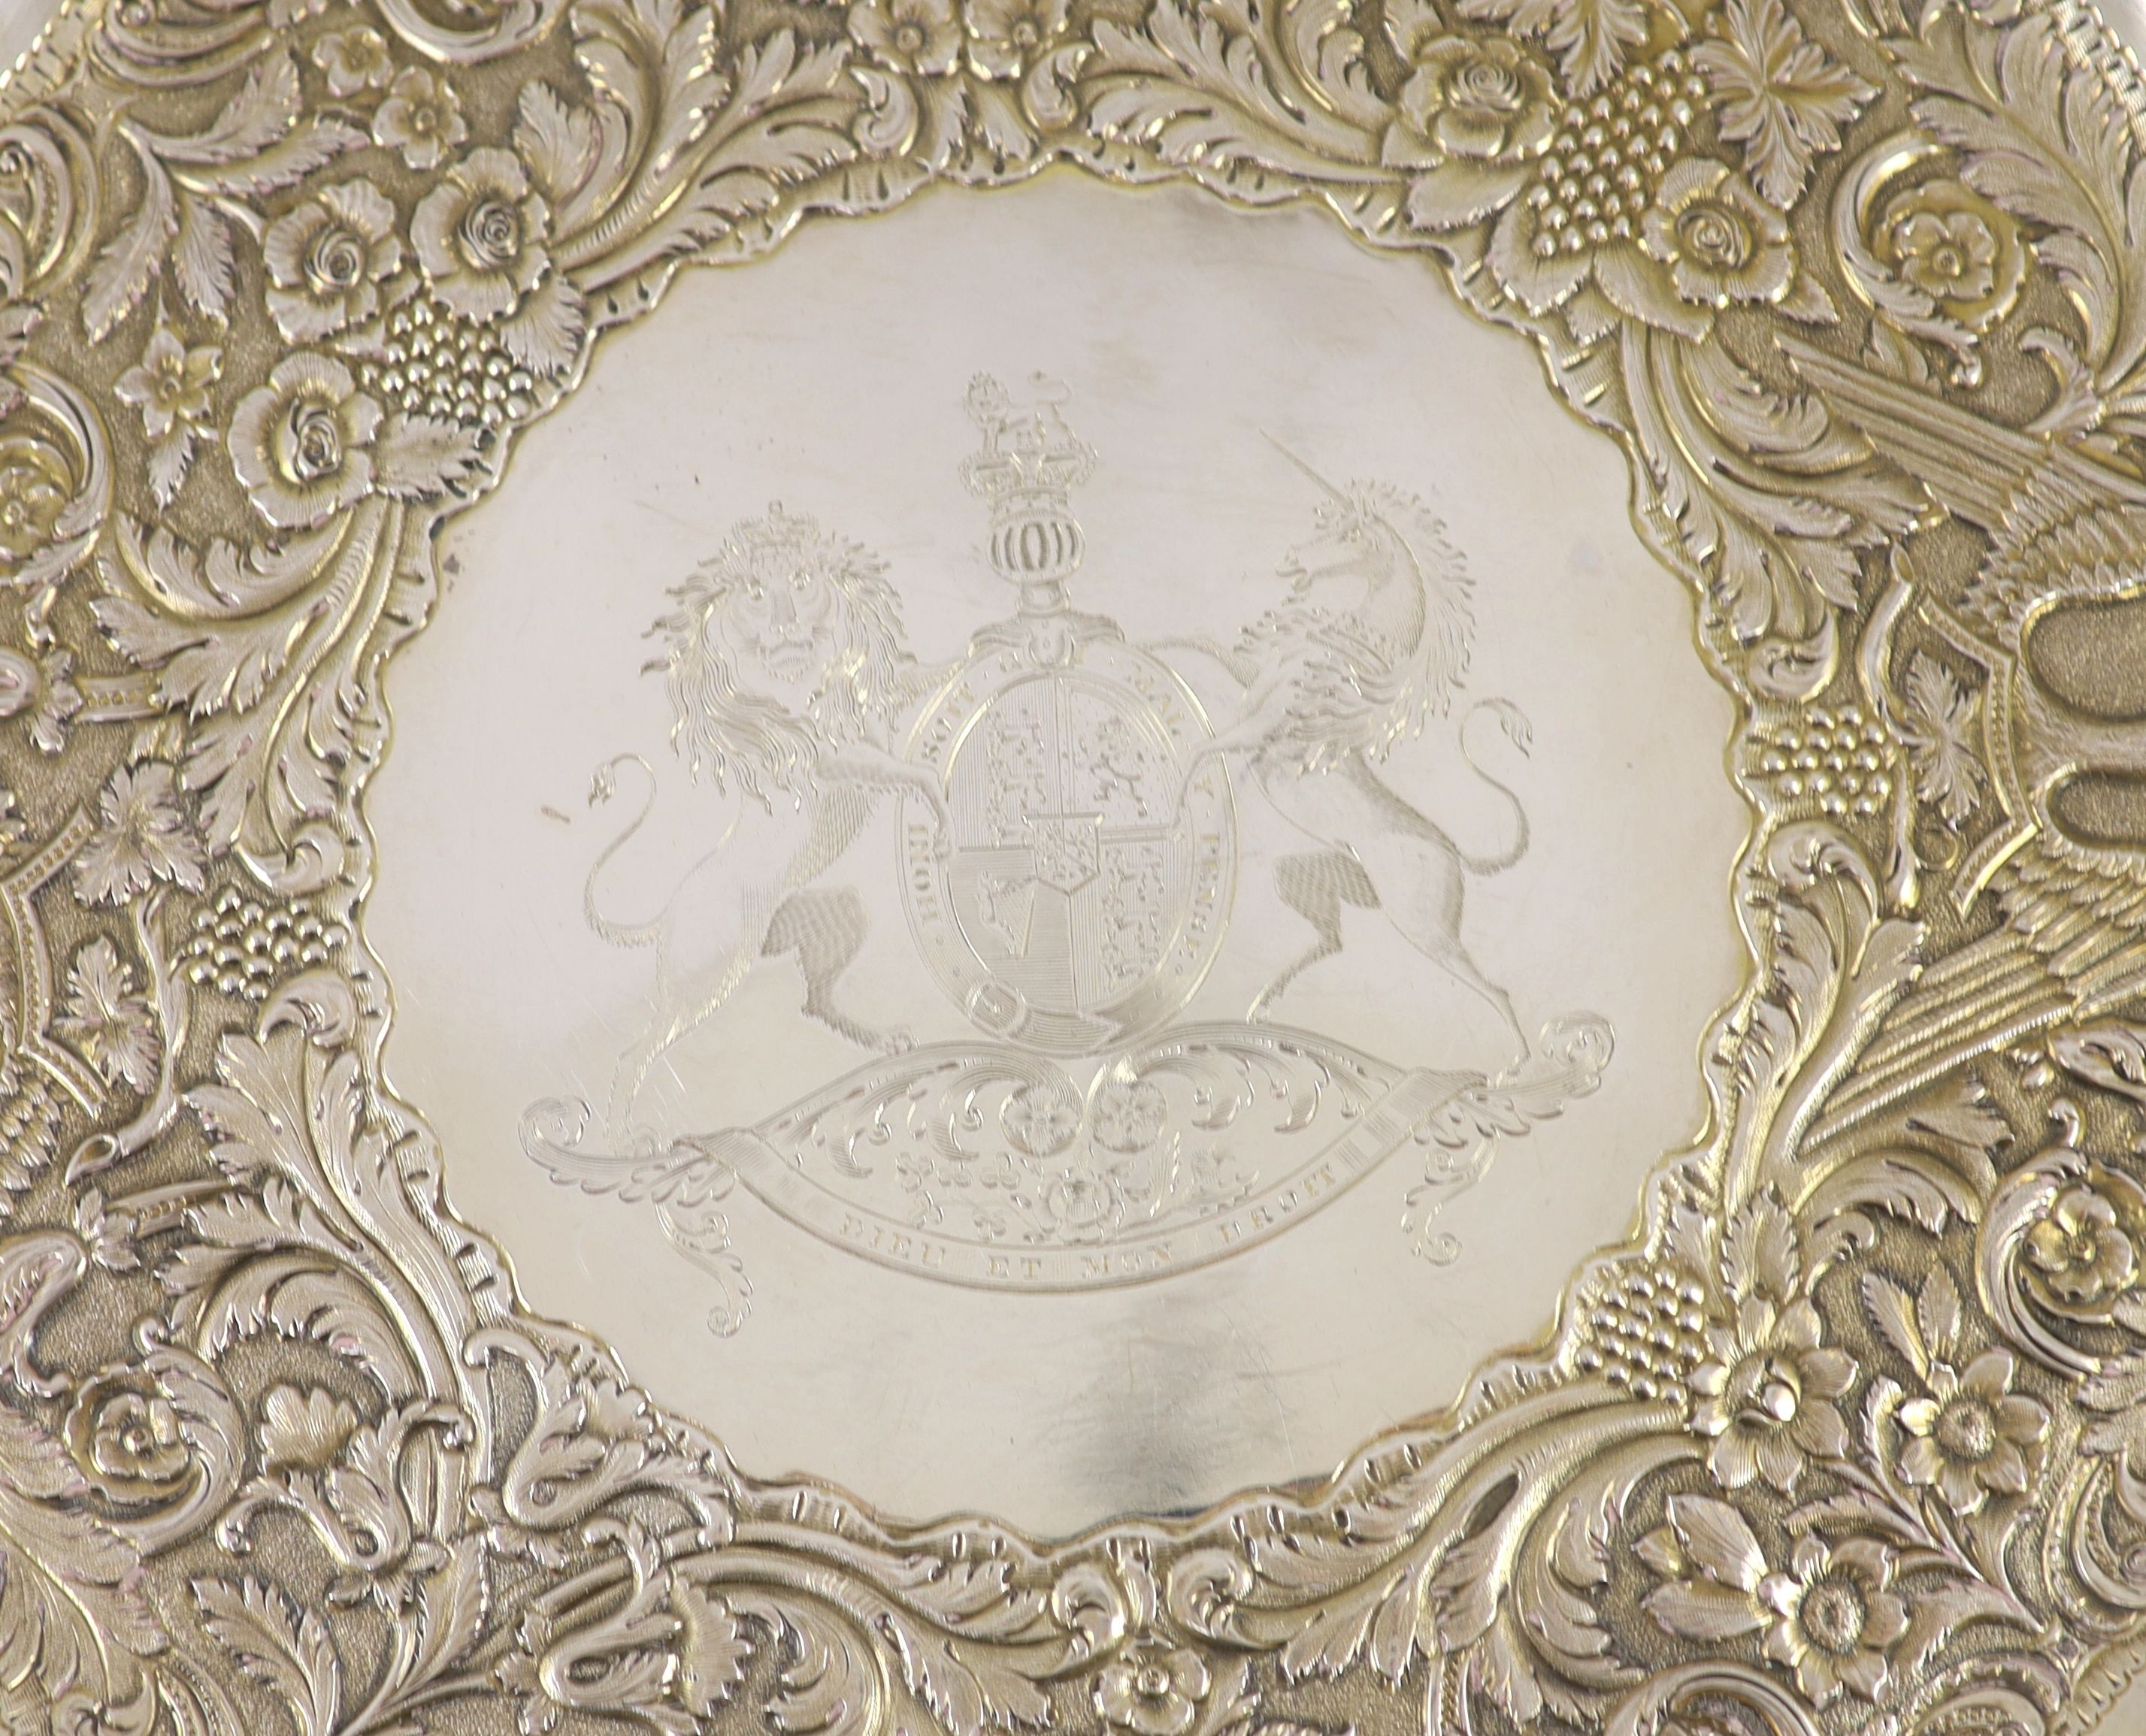 A William IV Irish embossed parcel gilt silver charger, by Robert W. Smith, engraved with the United Kingdom Royal Coat of Arms